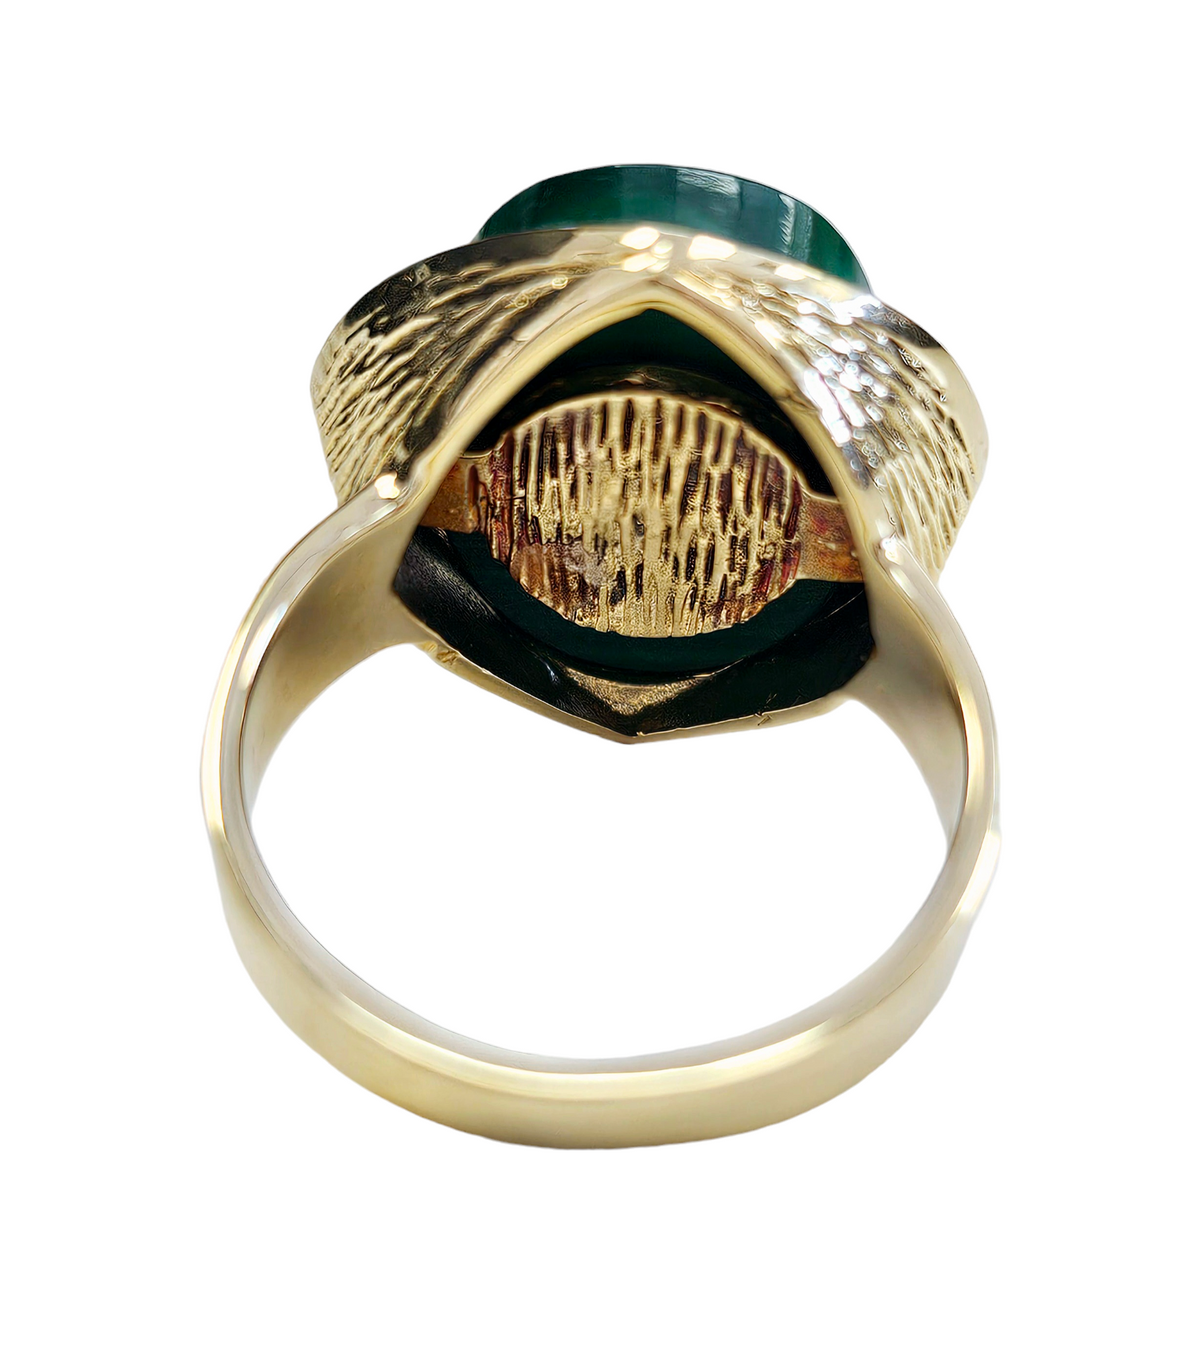 Green Oval Cabochon Malachite Modern designed Ring with Textured sides made in 18-Karat Yellow Gold